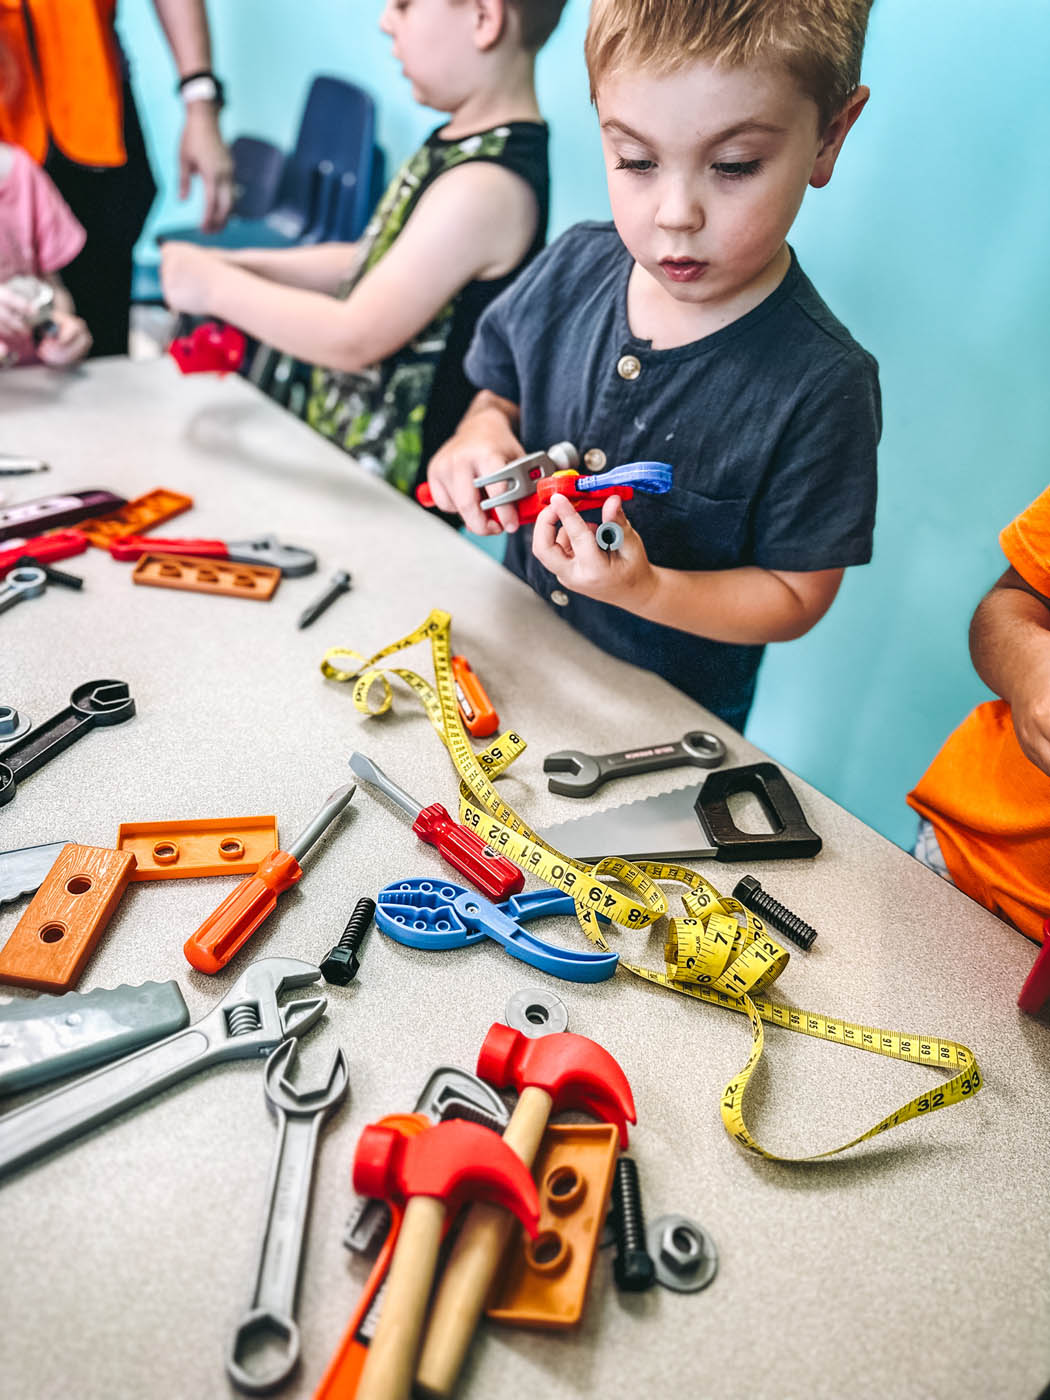 Kids enjoying a STEM class at Romp n' Roll - a unique indoor playground franchise.